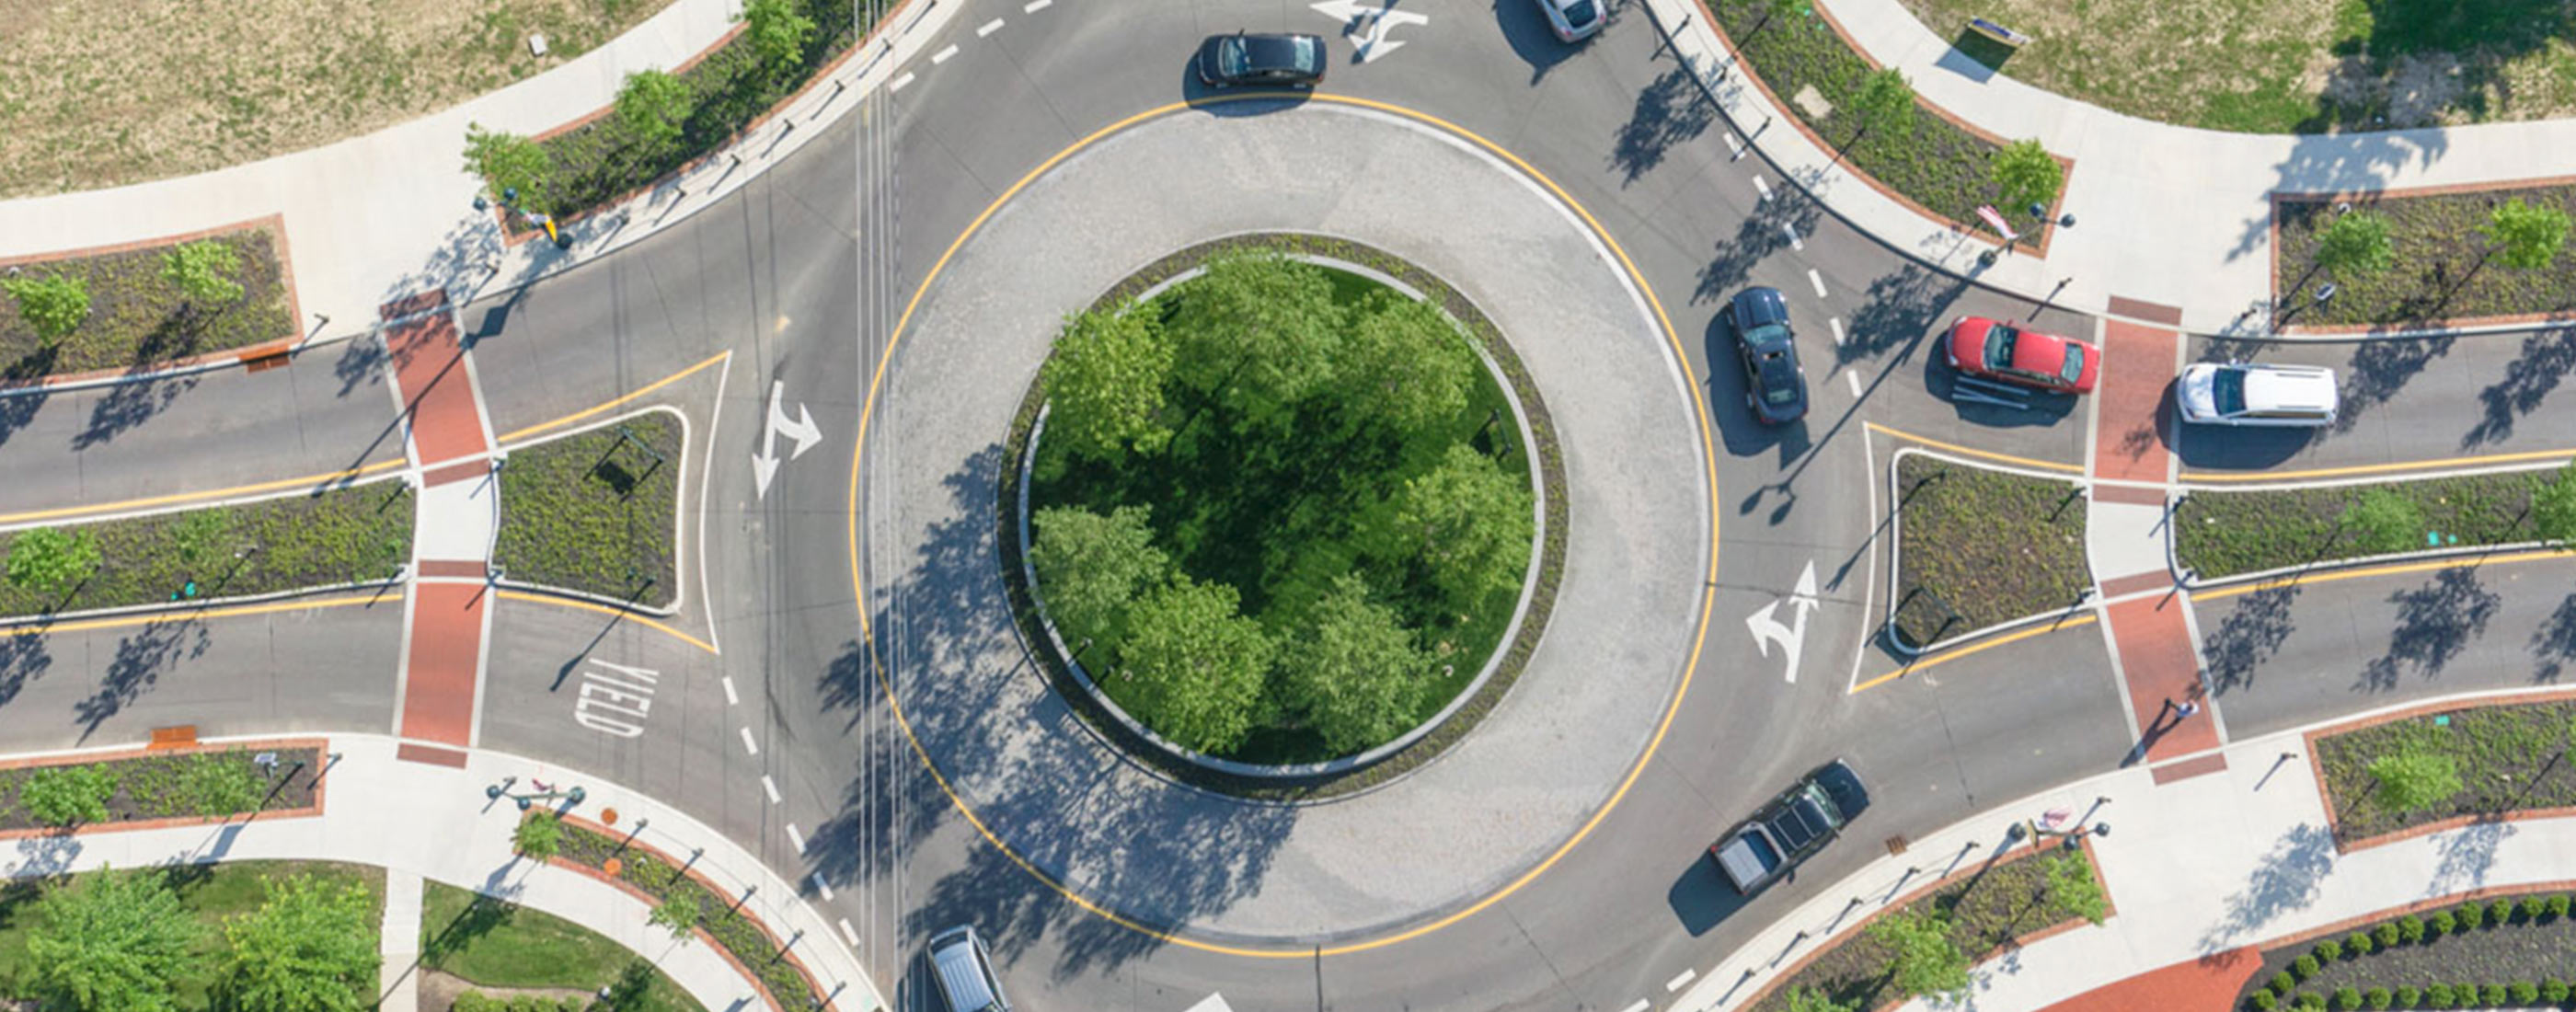 An aerial view of New Albany, Ohio’s central roundabout, designed by OHM Advisors.